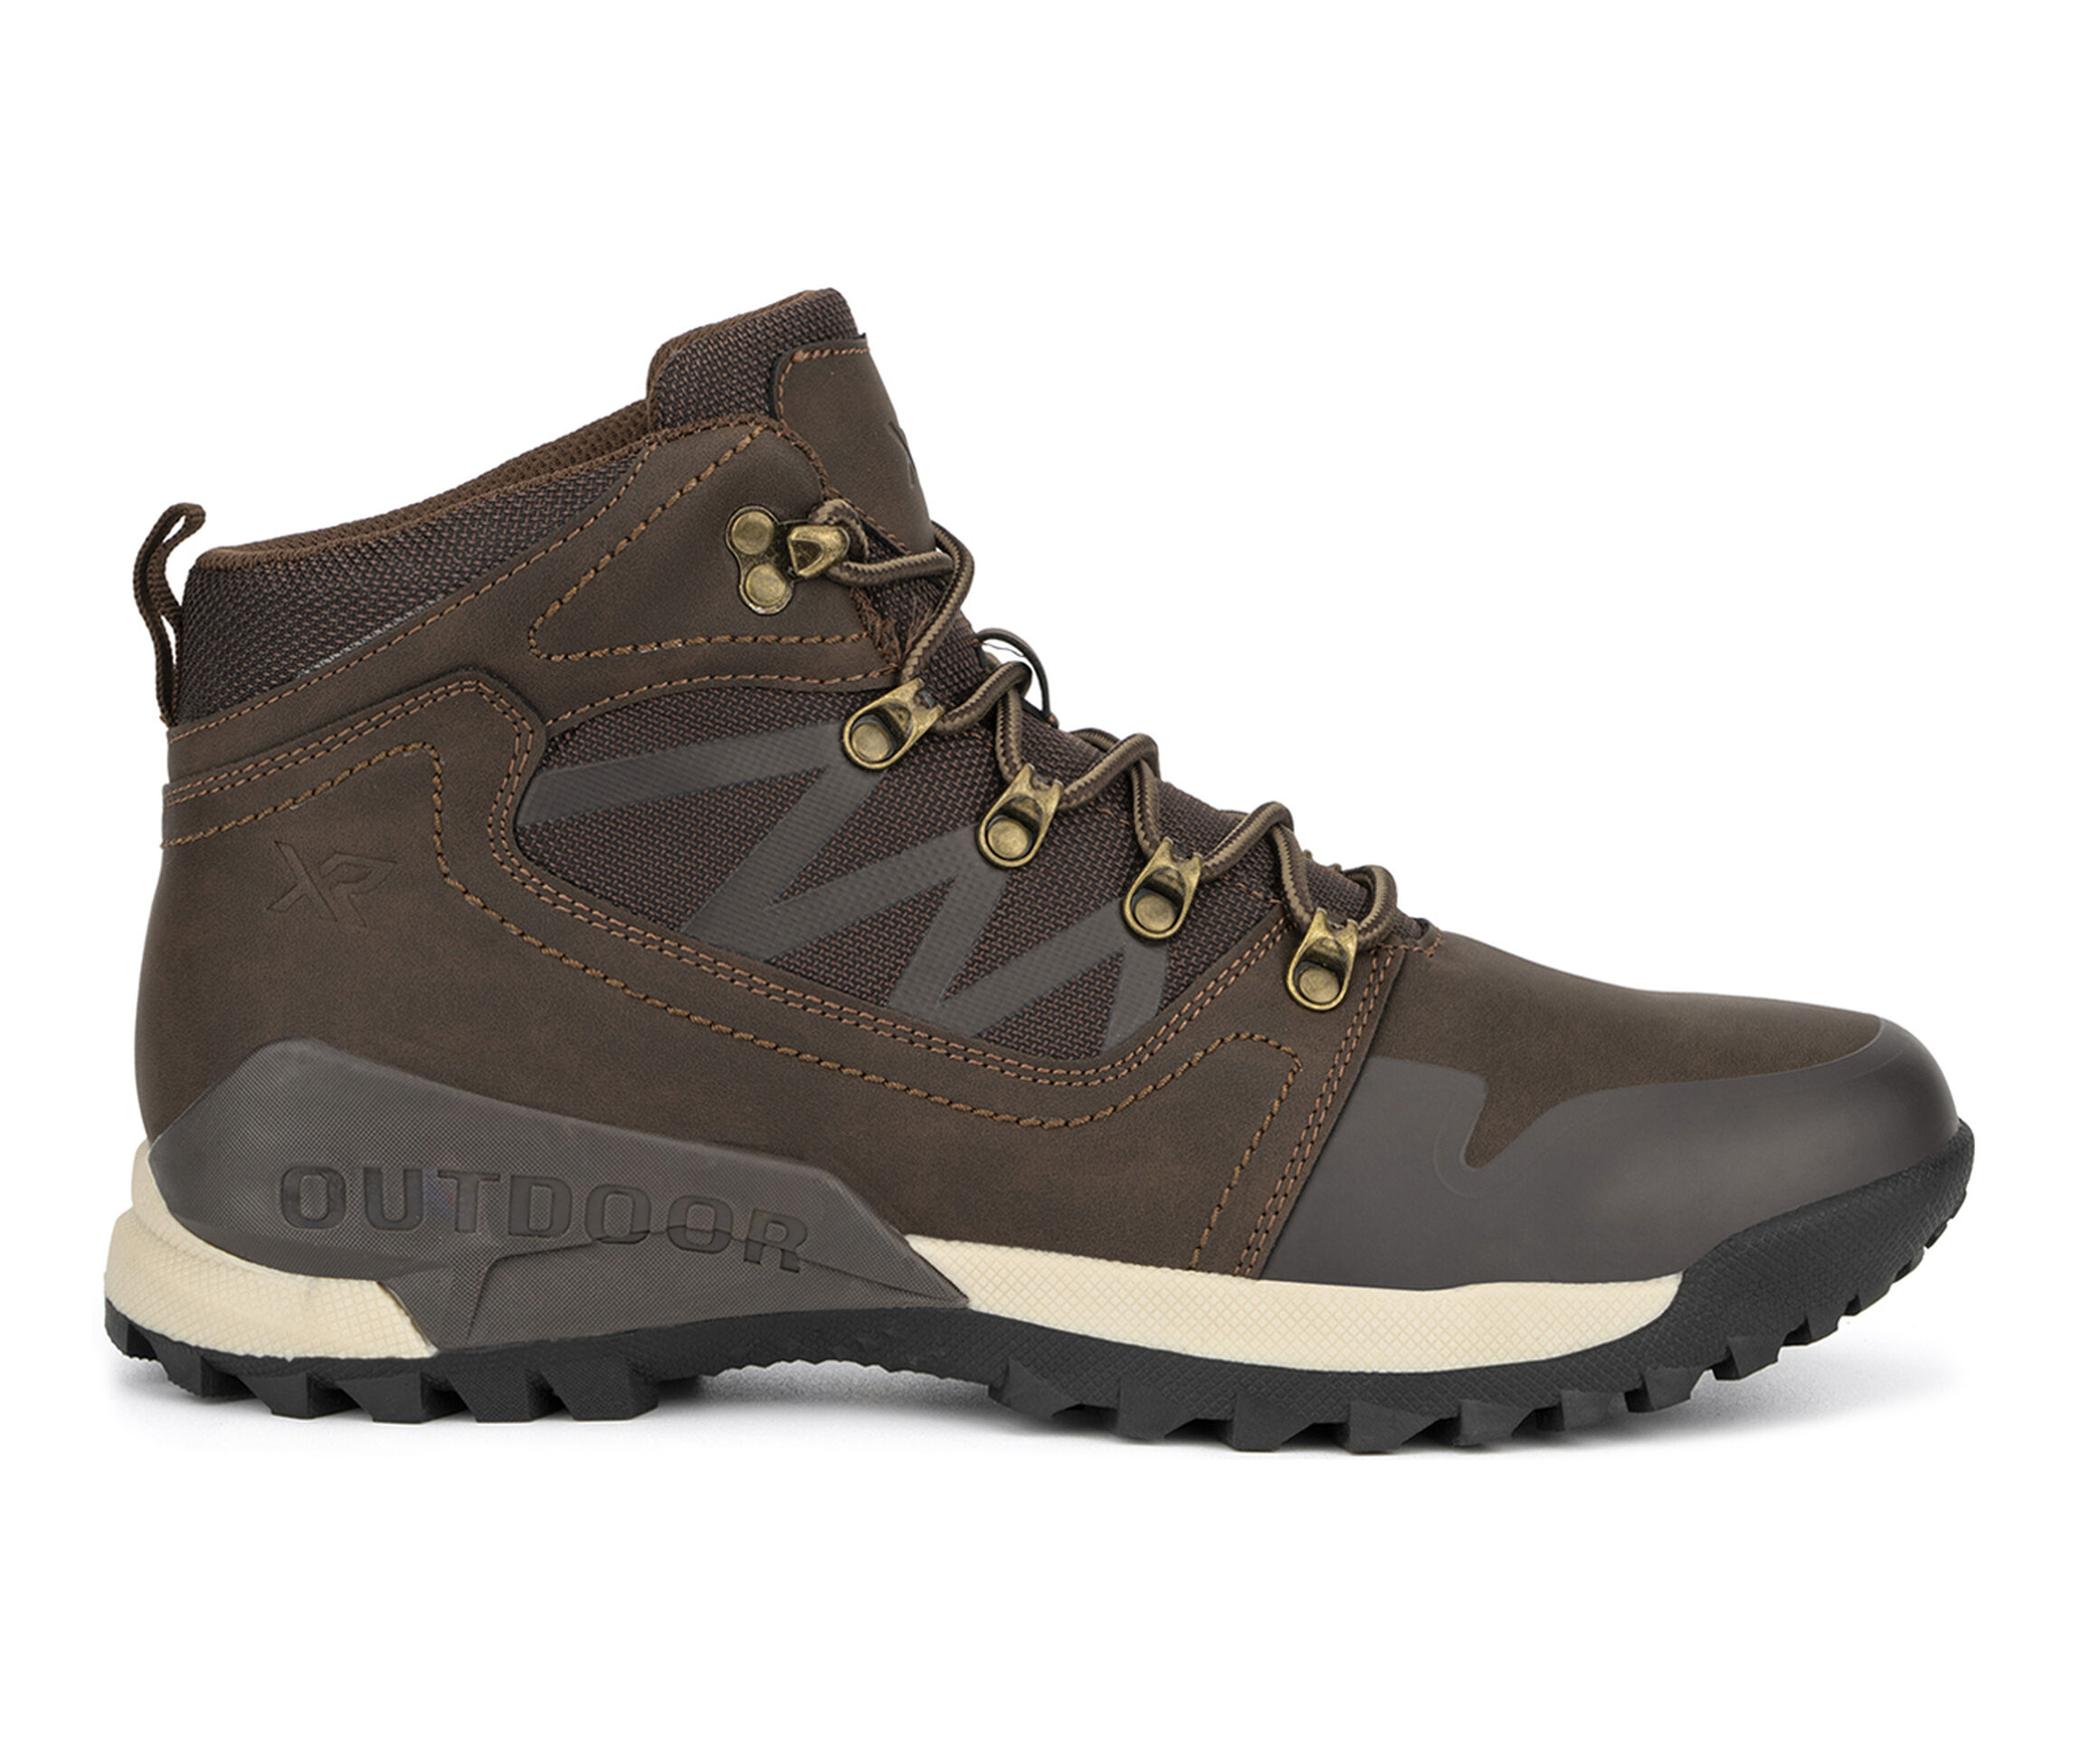 Men's Hiking & Hunting Boots | Shoe Carnival